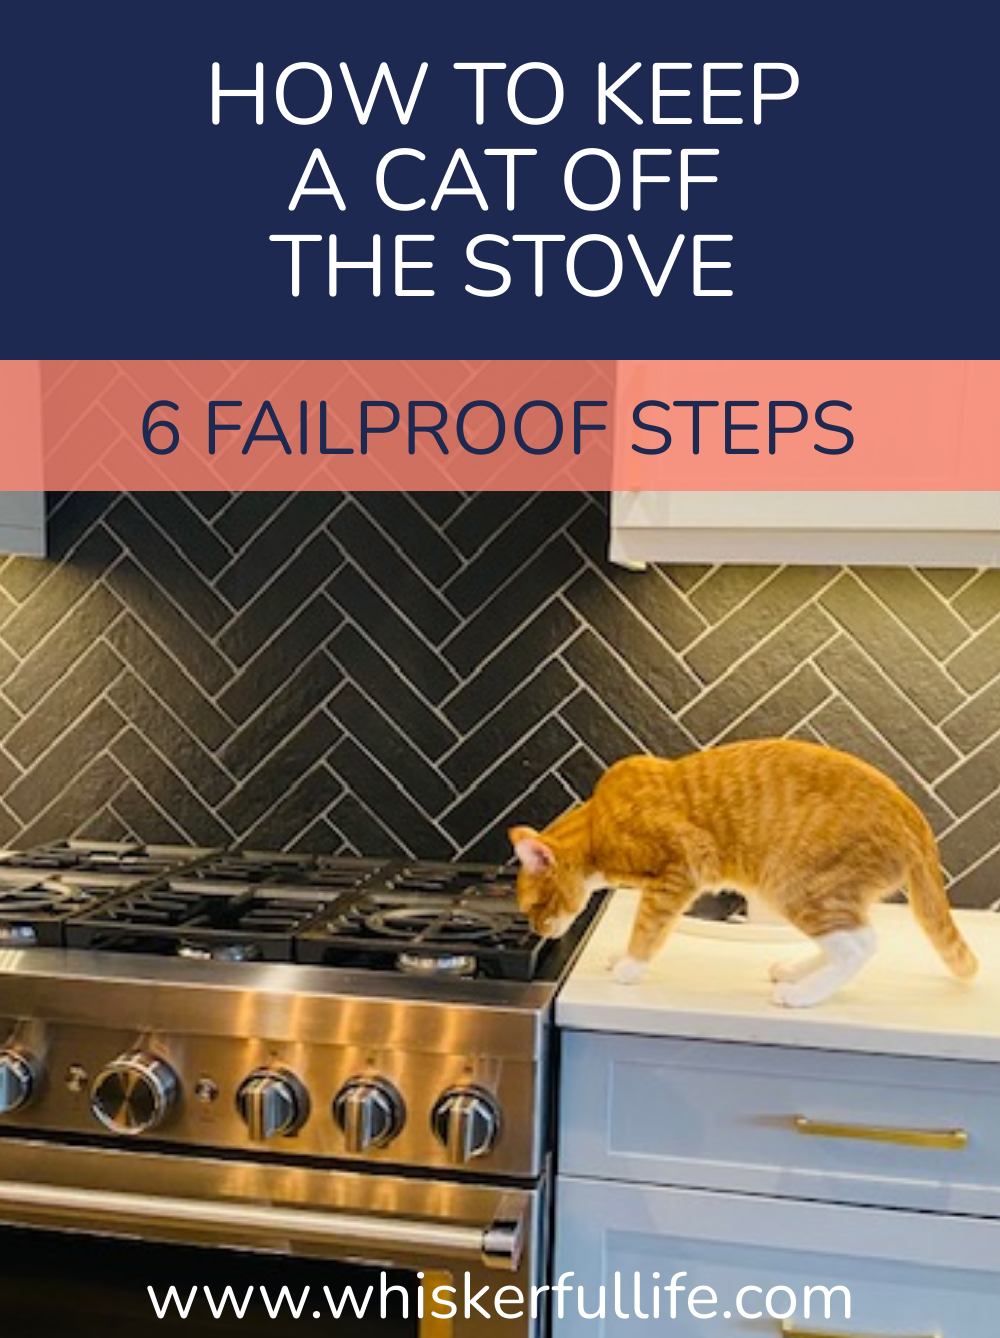 How to Keep a Cat Off the Stove